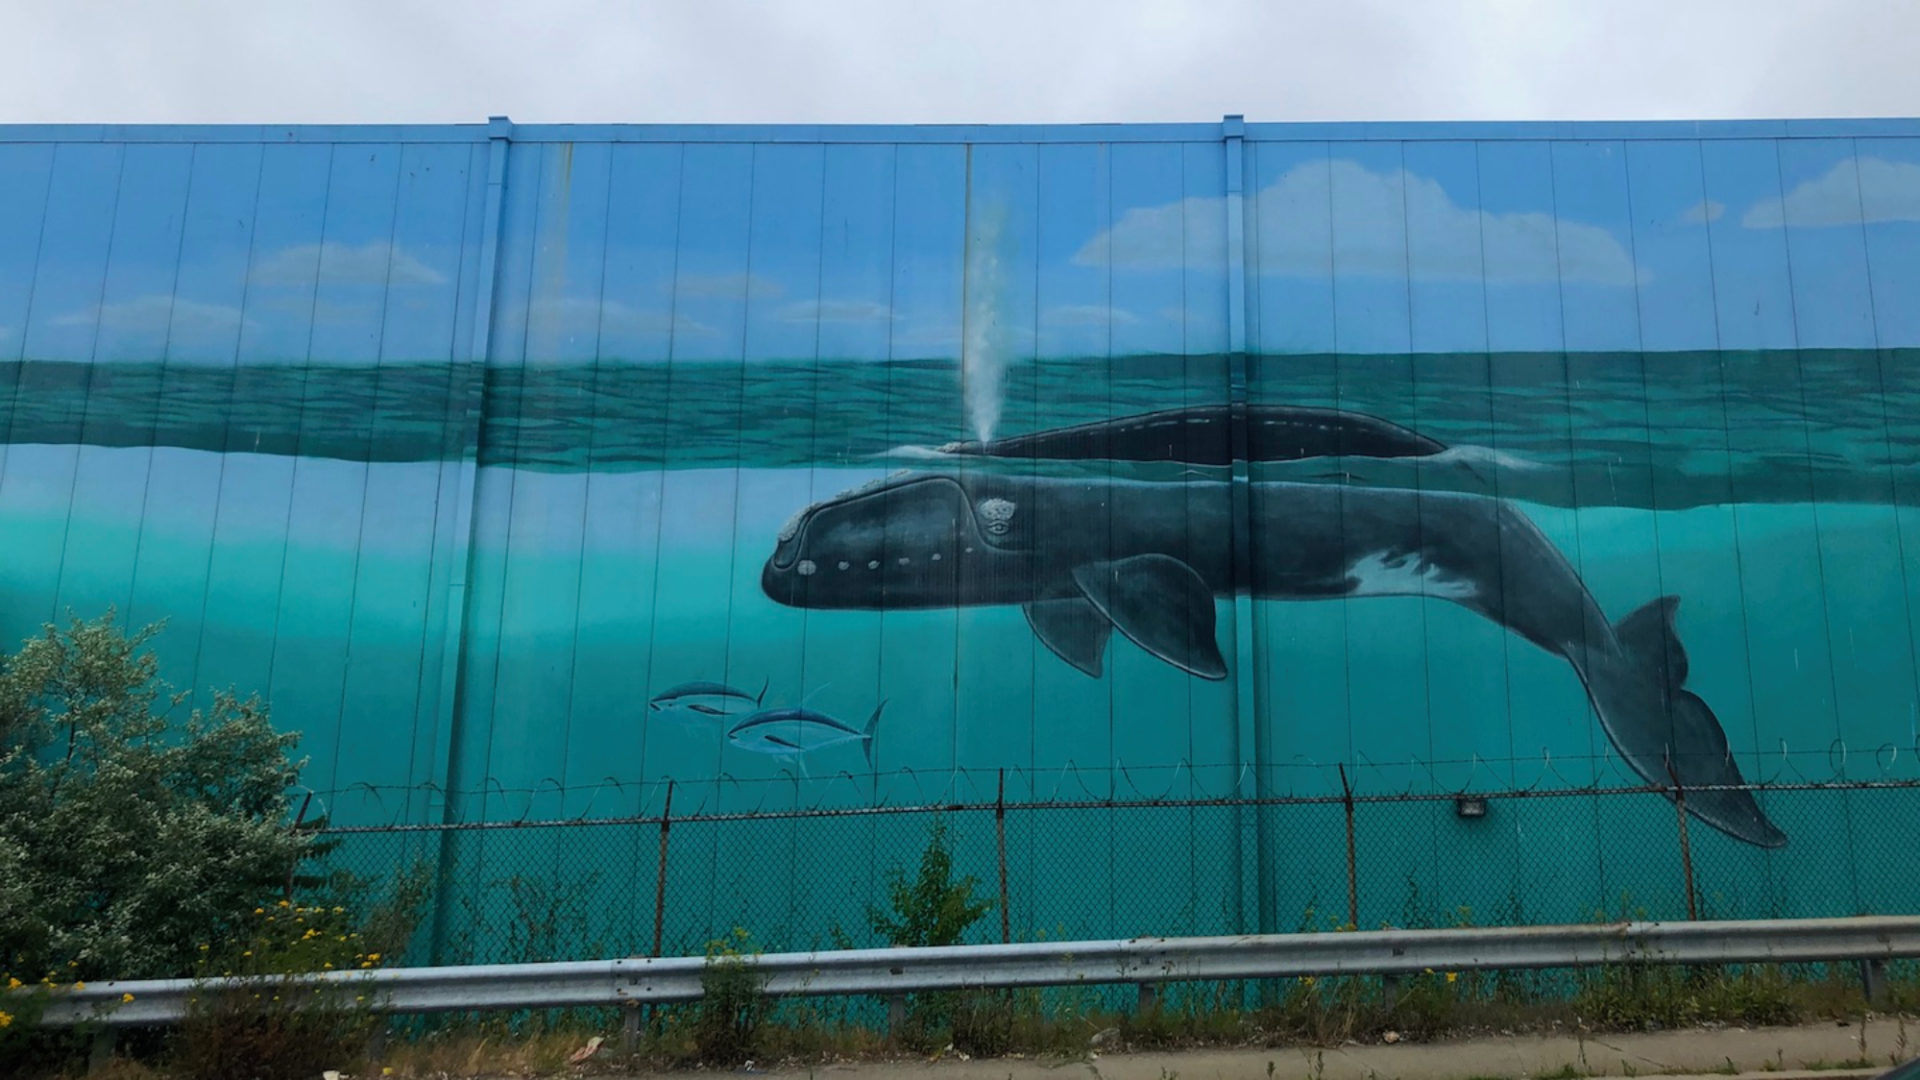 Mural of a whale and two baby whales in light and dark blues on the side of a building.